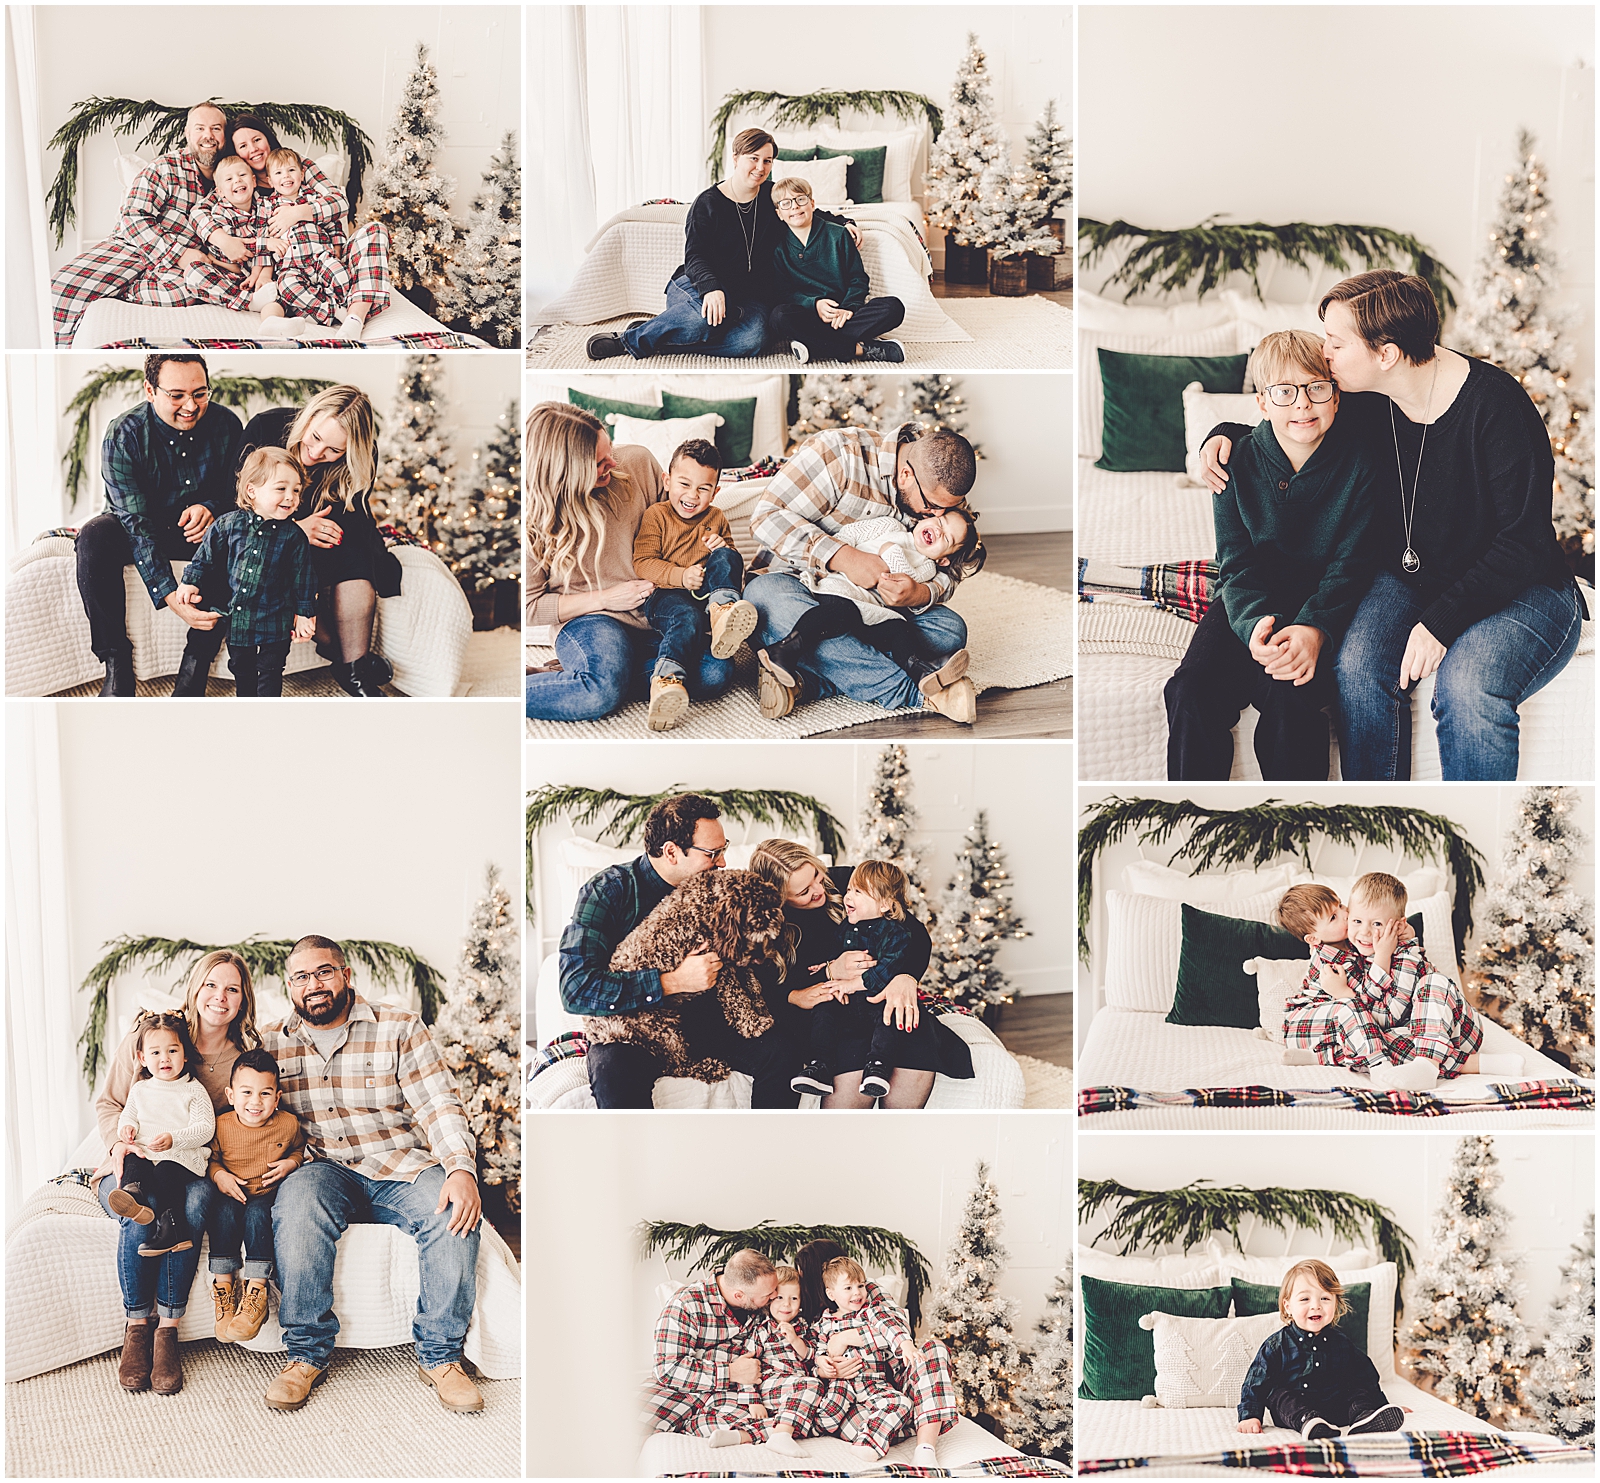 Holiday mini sessions at the natural light Studio 388 owned by Kyle and Kara Evans at Kara Evans Photographer in Kankakee, Illinois.